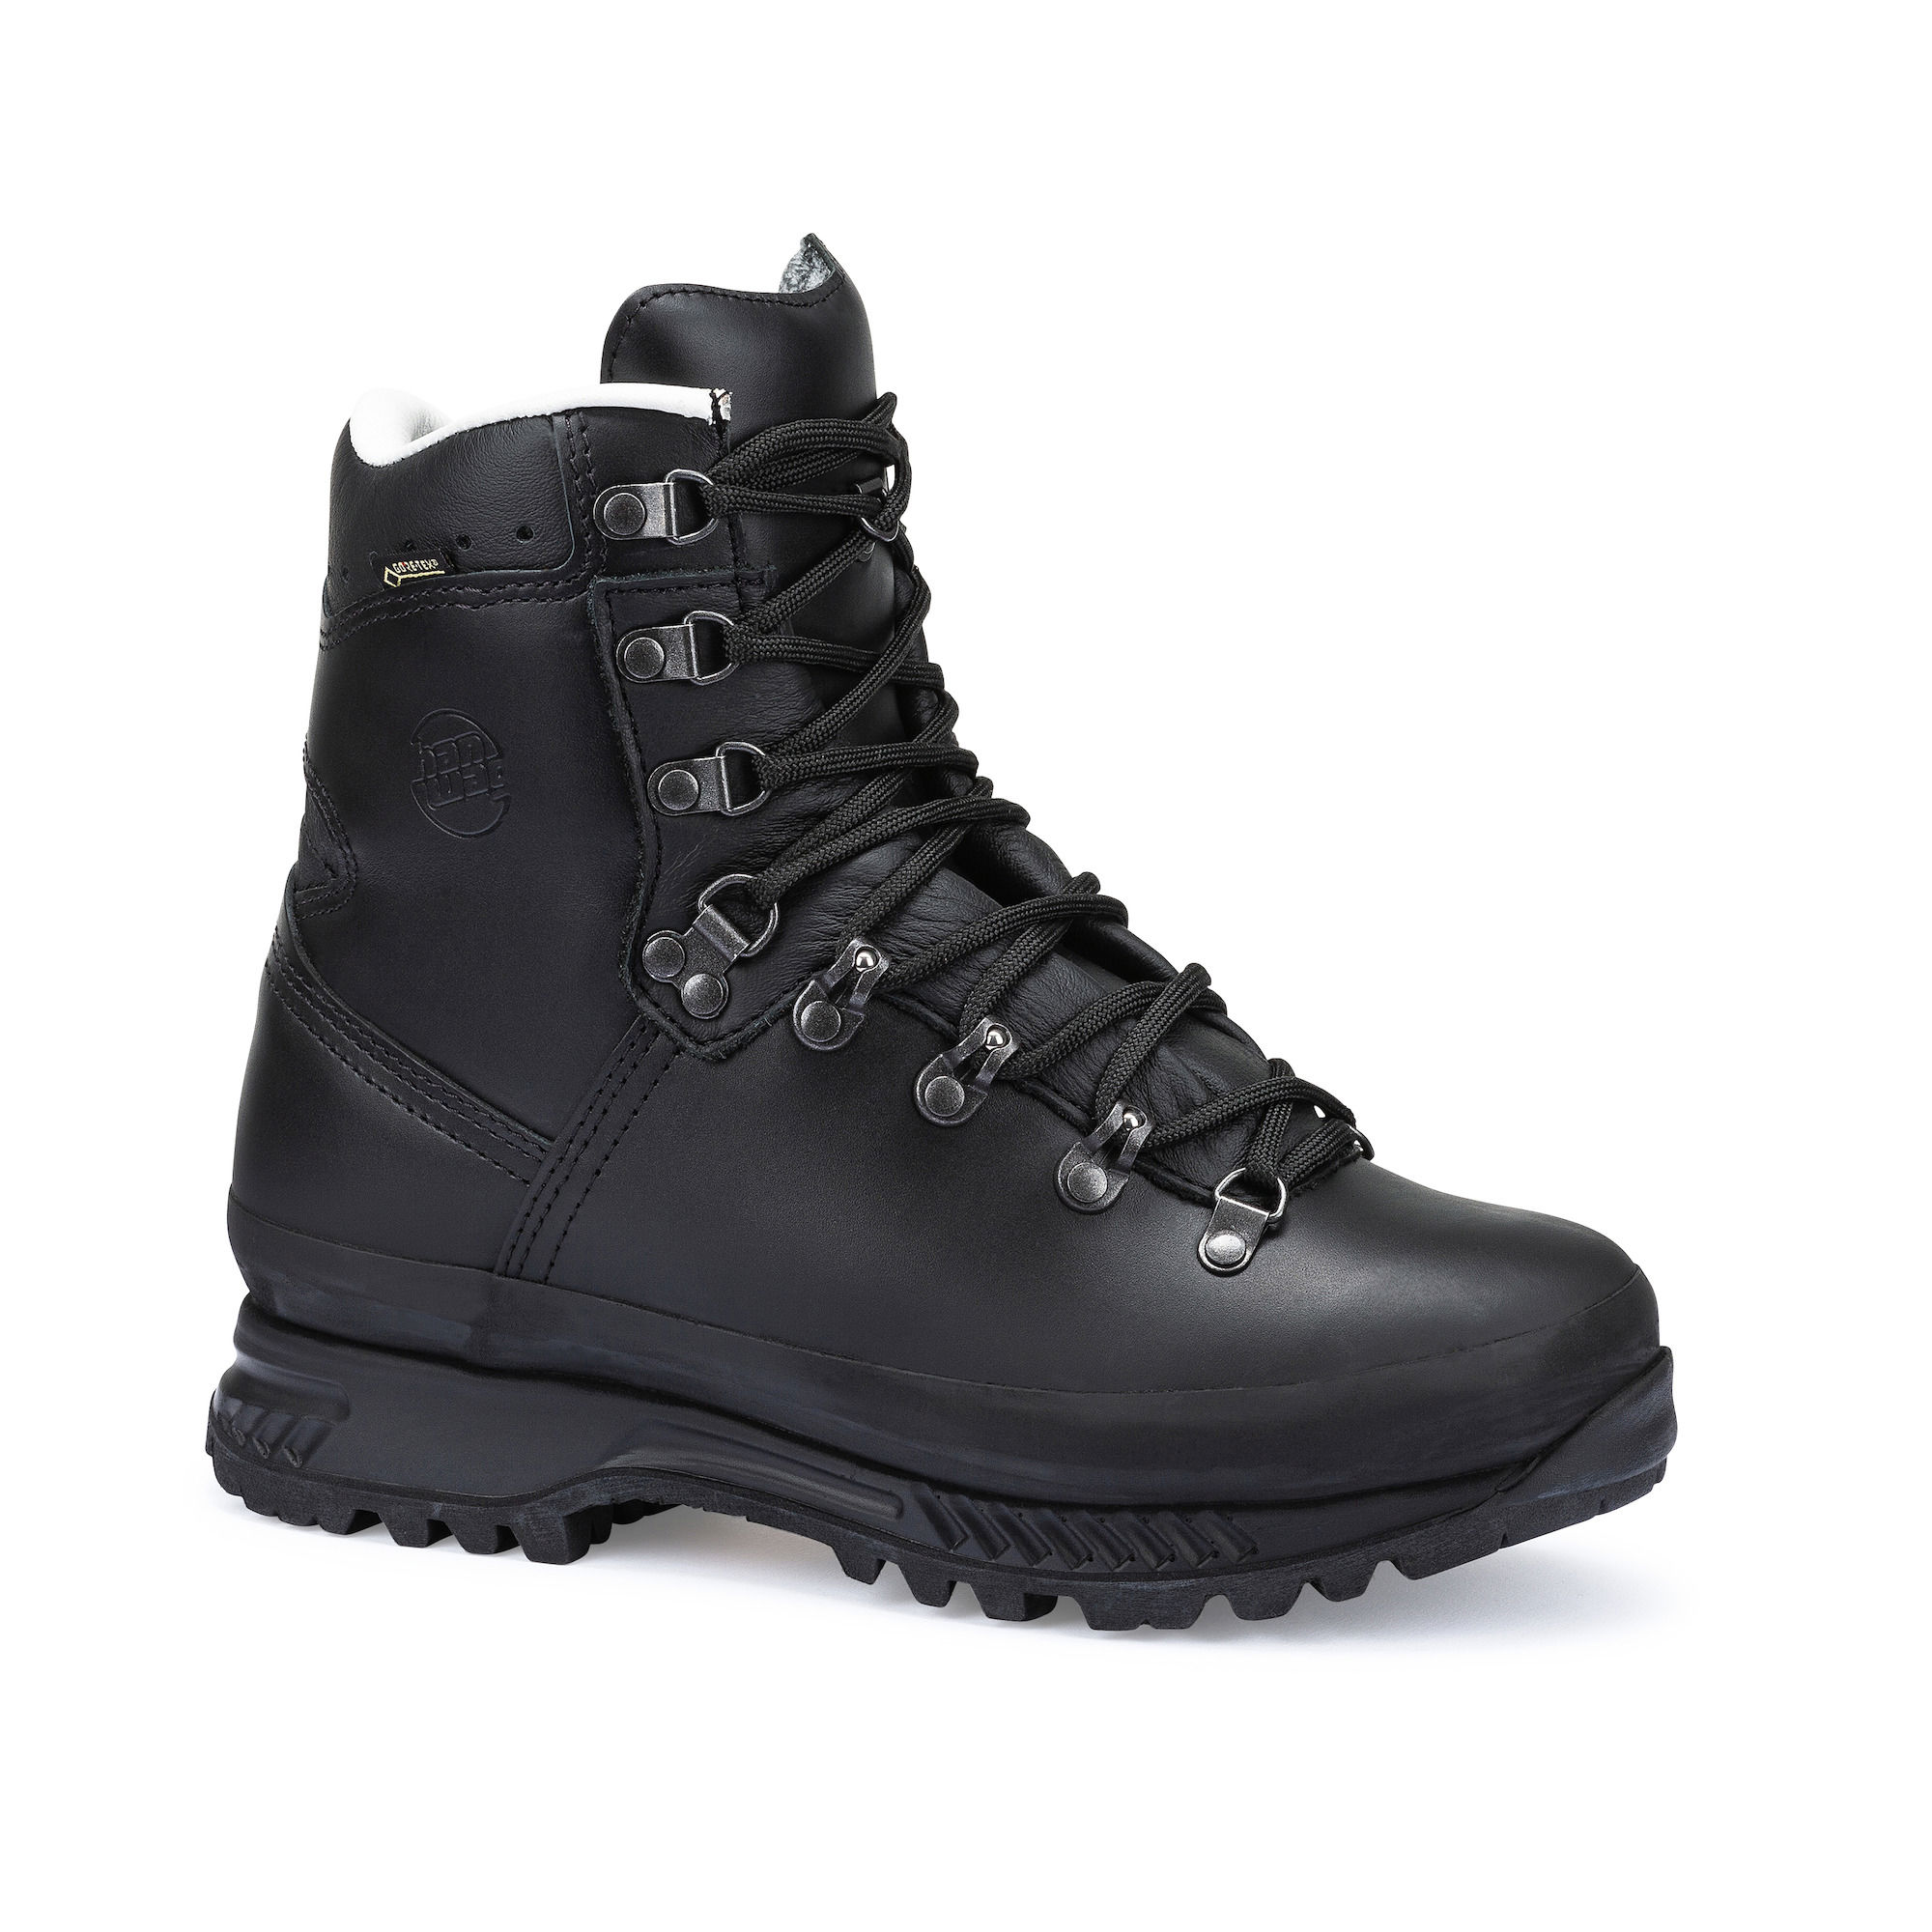 Penelope mout Lucht Special Force GTX